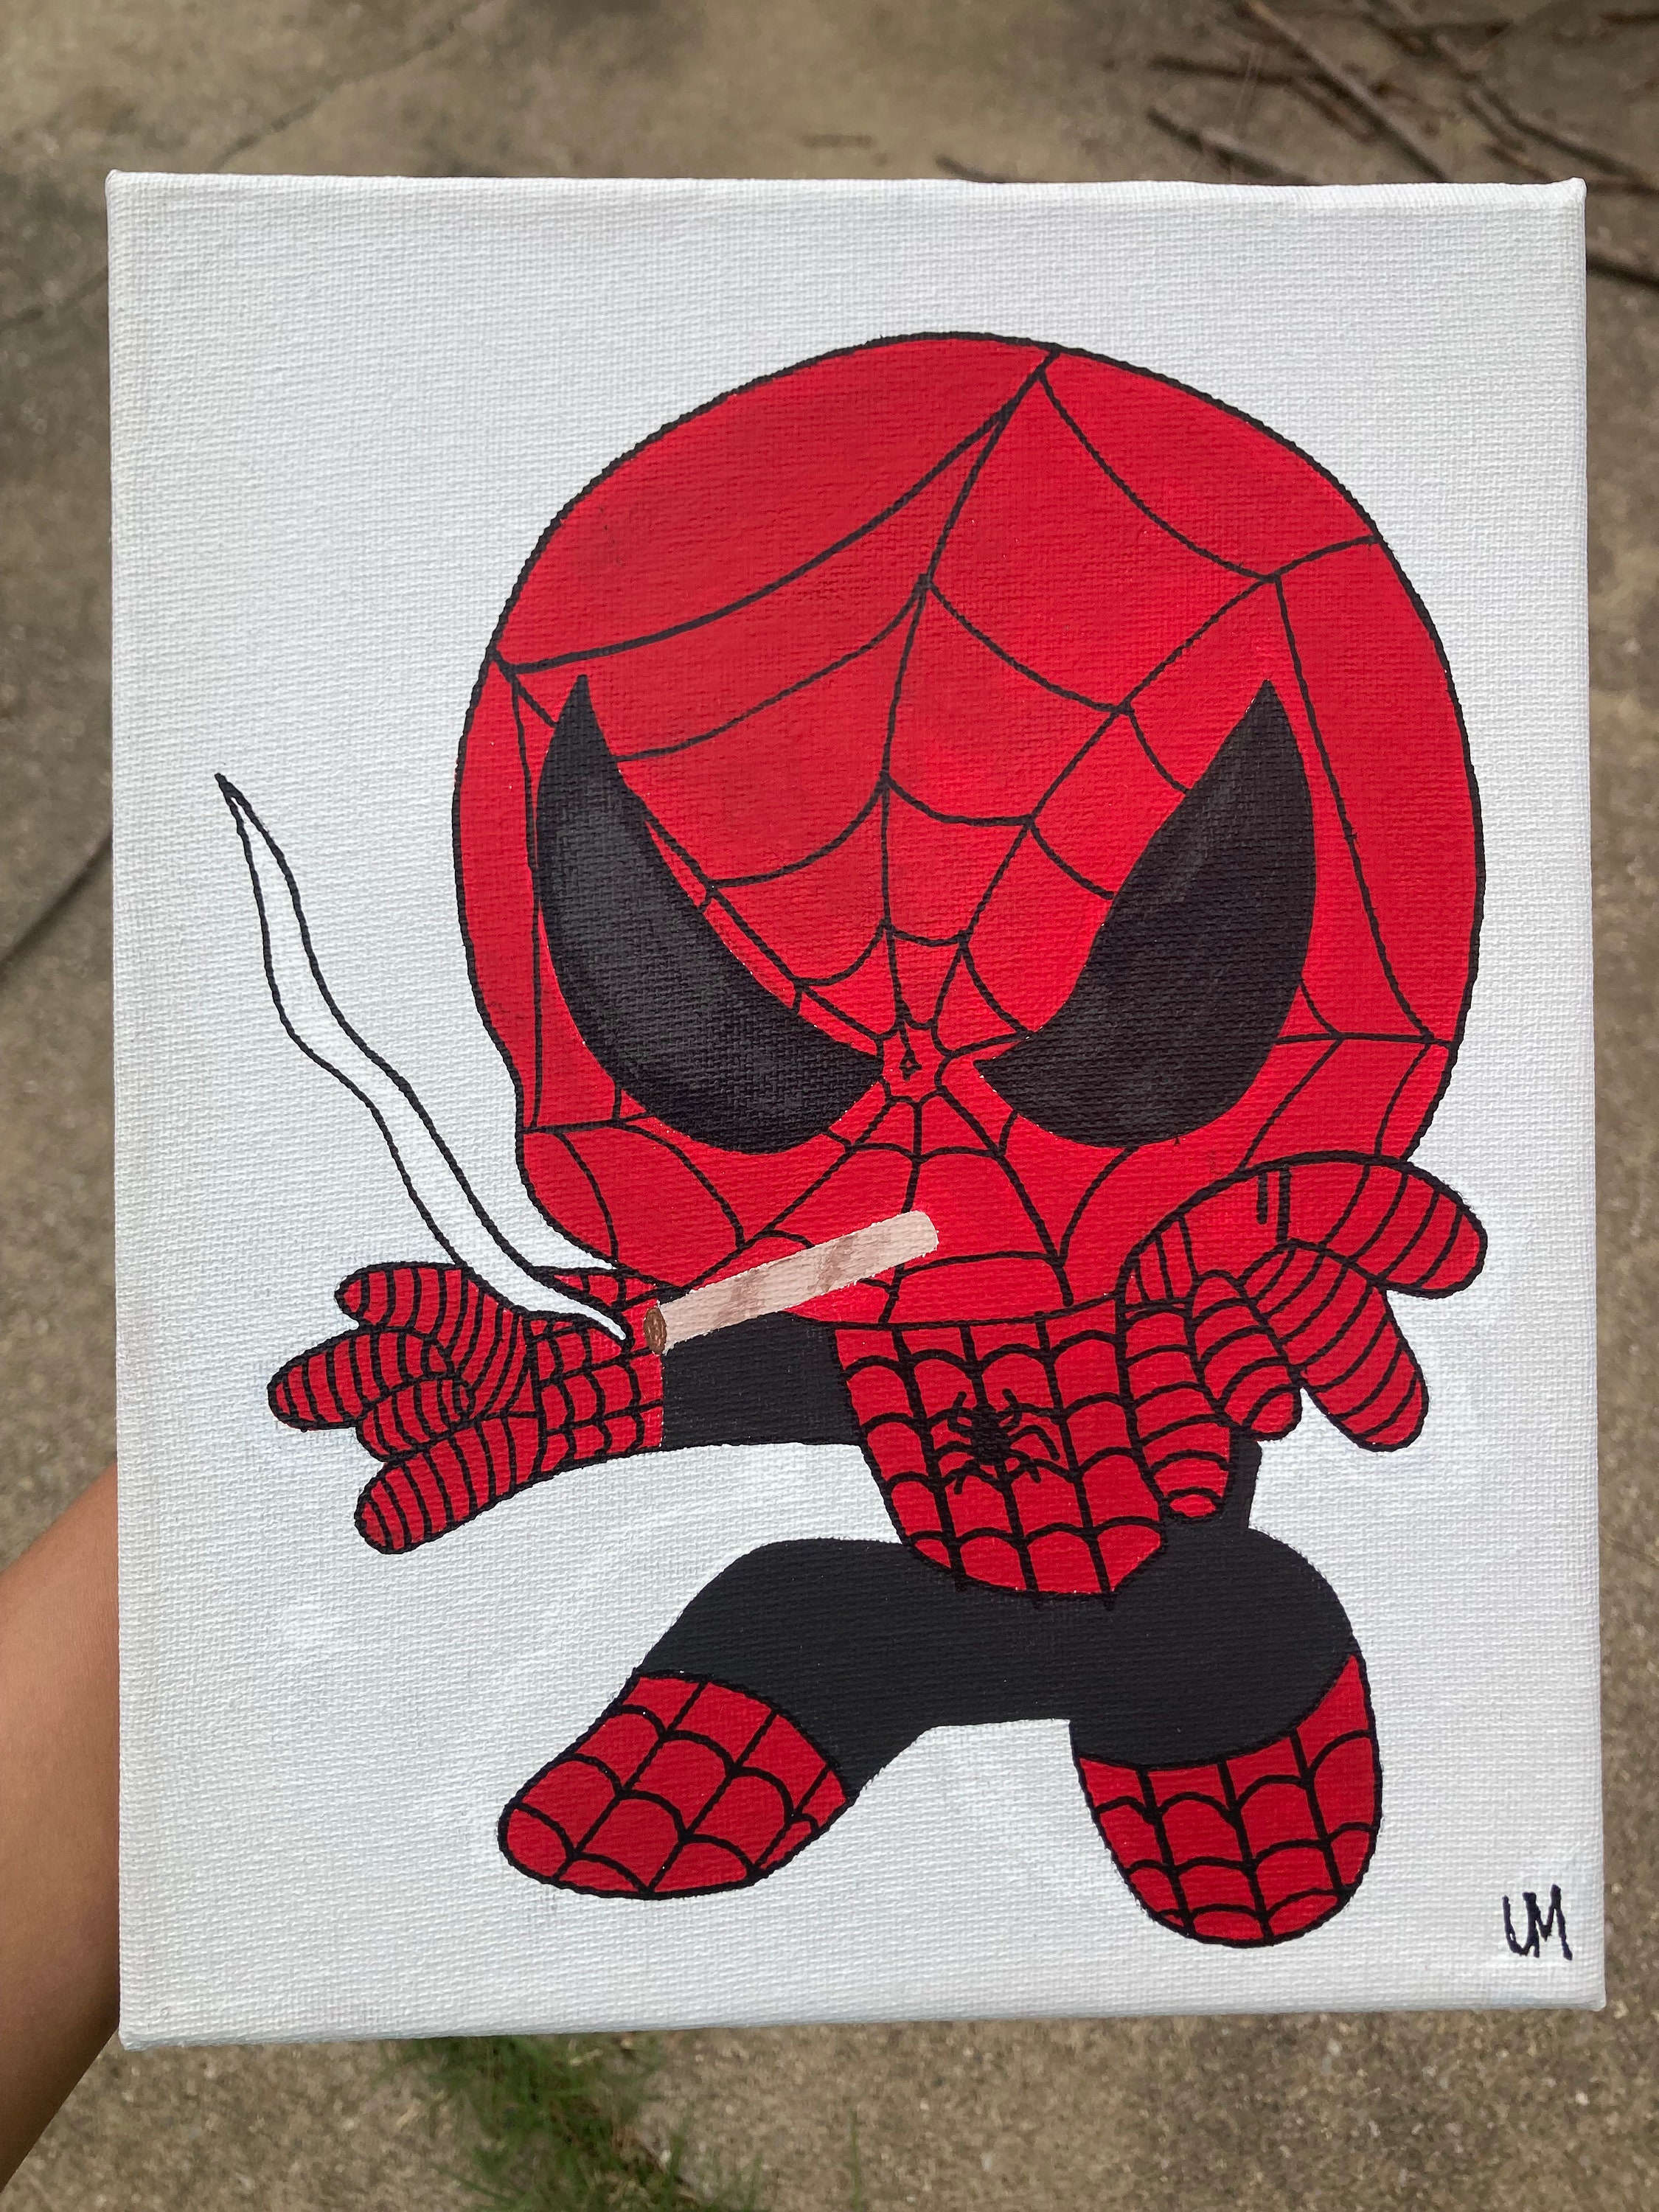 Spiderman Rolling Tray Set. Weed Tray, 